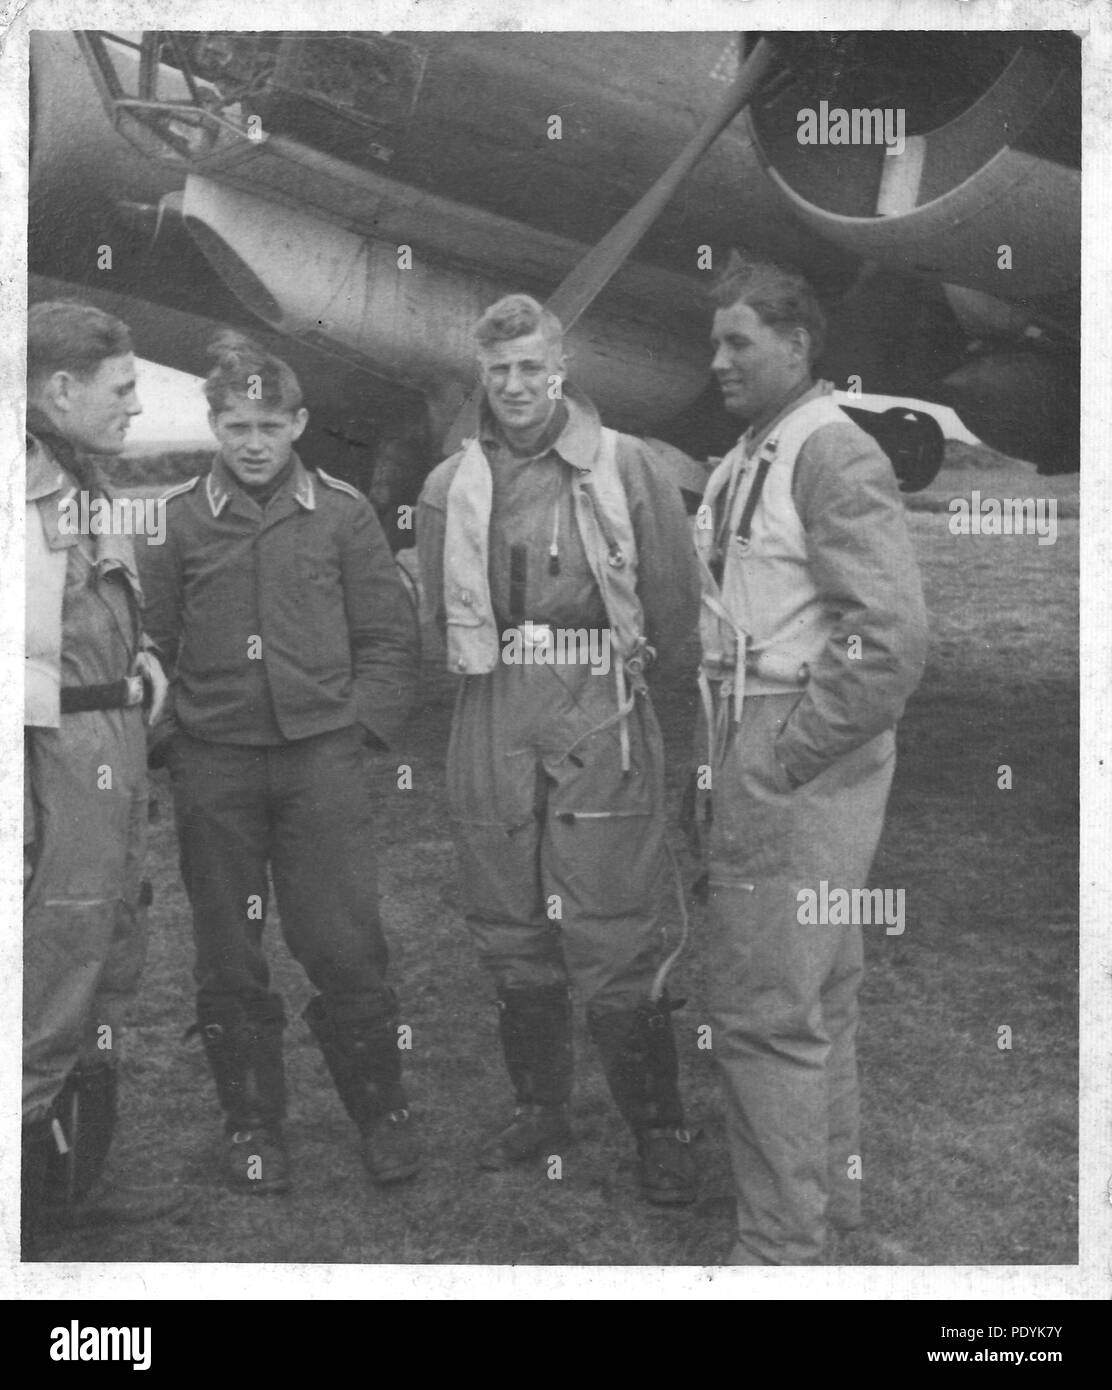 Image from the photo album of Feldwebel Willi Hoffmann of 5. Staffel, Kampfgeschwader 30: Willi Erkens and his crew from 5./KG 30 pose in front of their Junkers Ju 88 bomber in 1940. From left to right; Unteroffizier Willi Erkens (Pilot), Unknown Unteroffizier, Unteroffizier Otto Beinmüller (Radio Operator), Gefreiter Willi Hoffmann (Air Gunner). Stock Photo